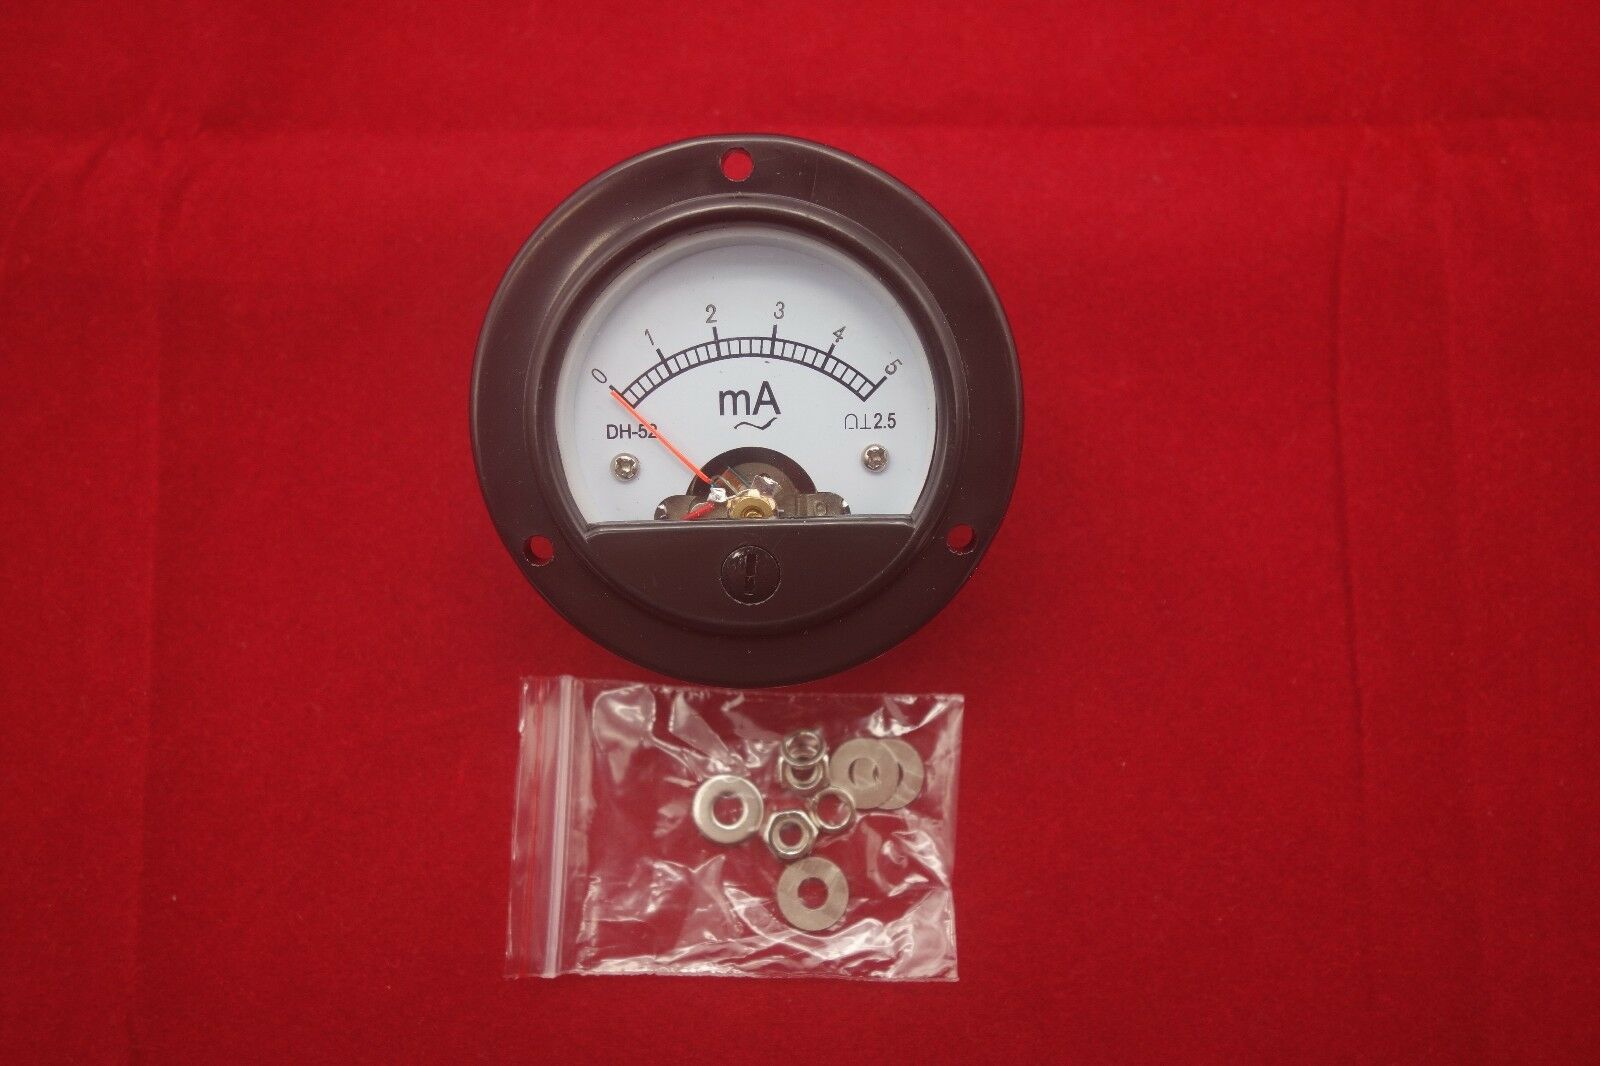 1pc AC 0-5MA Round Analog Ammeter Panel AMP Current Meter Dia. 66.4mm DH52